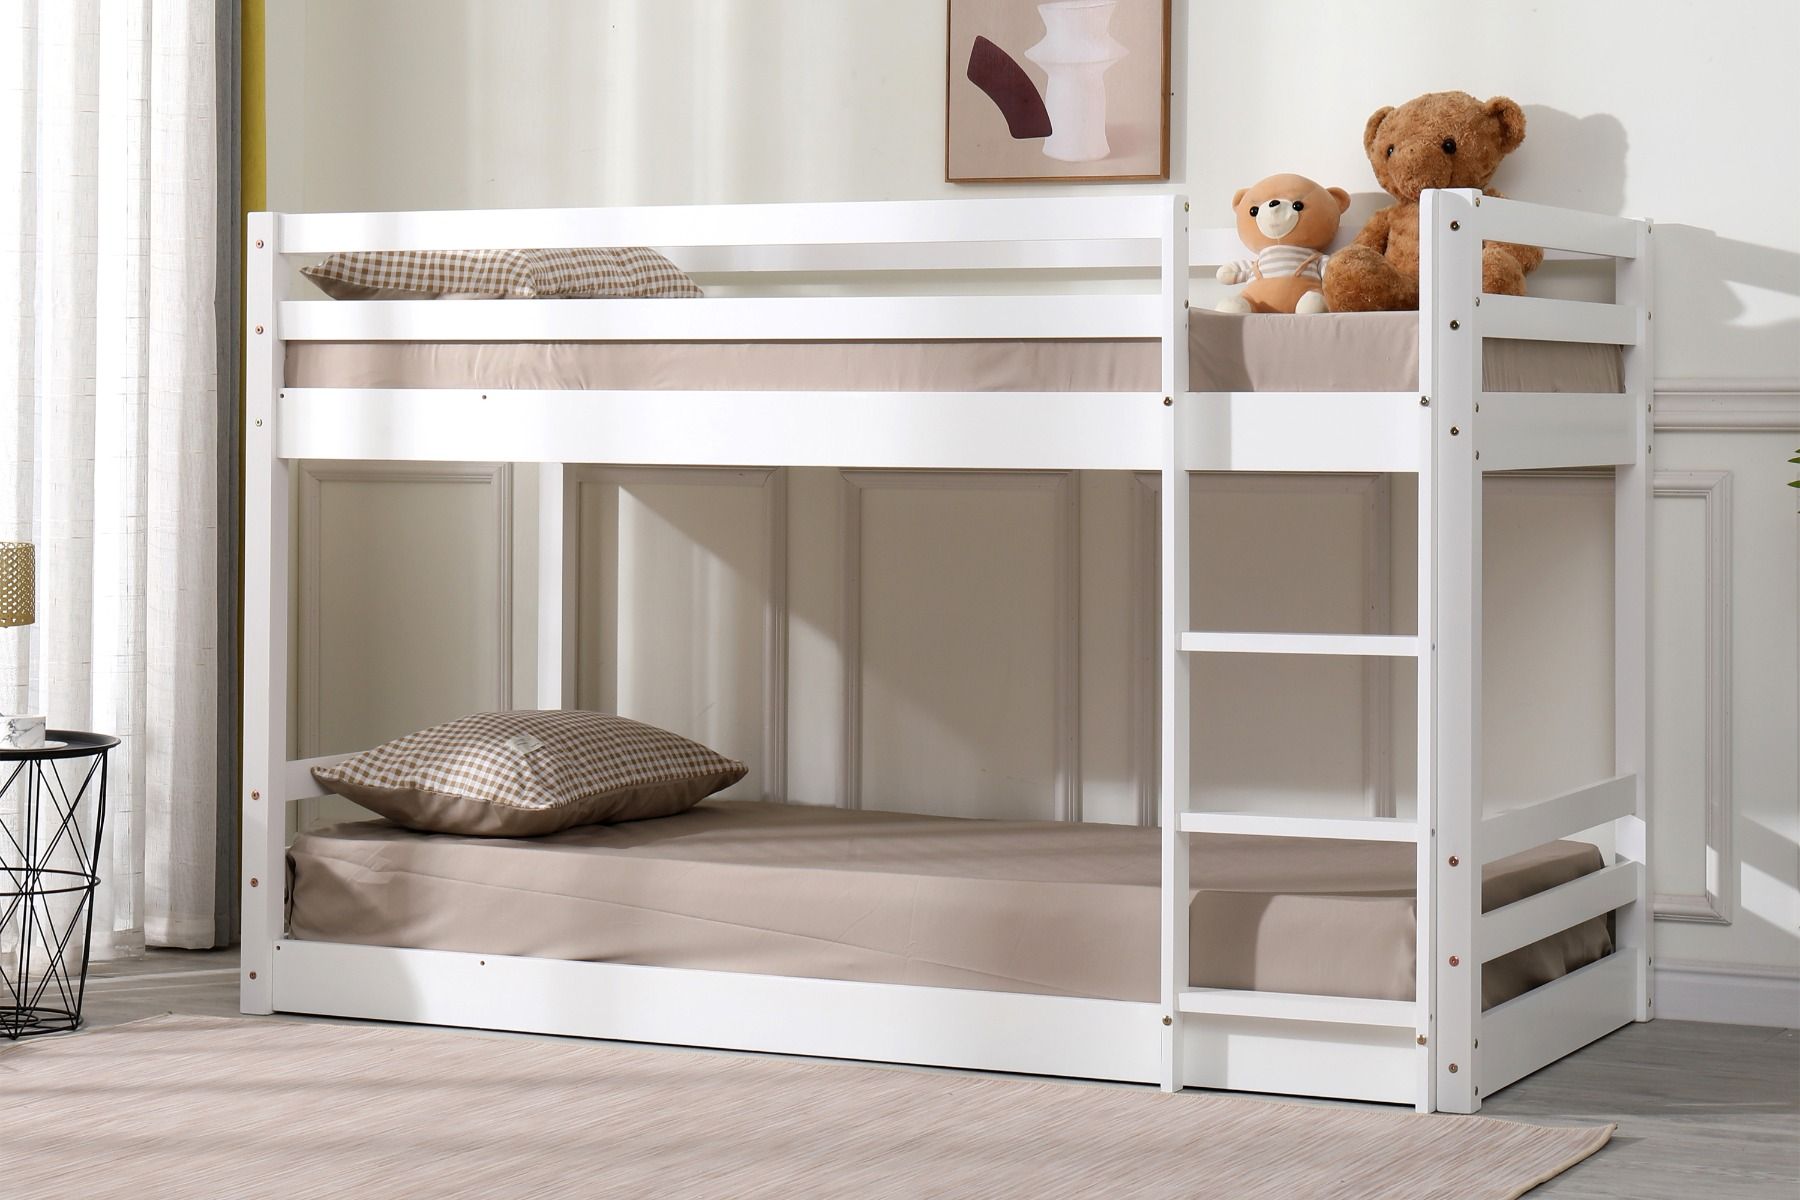 Flair Wooden Spark Low Bunk Bed - White